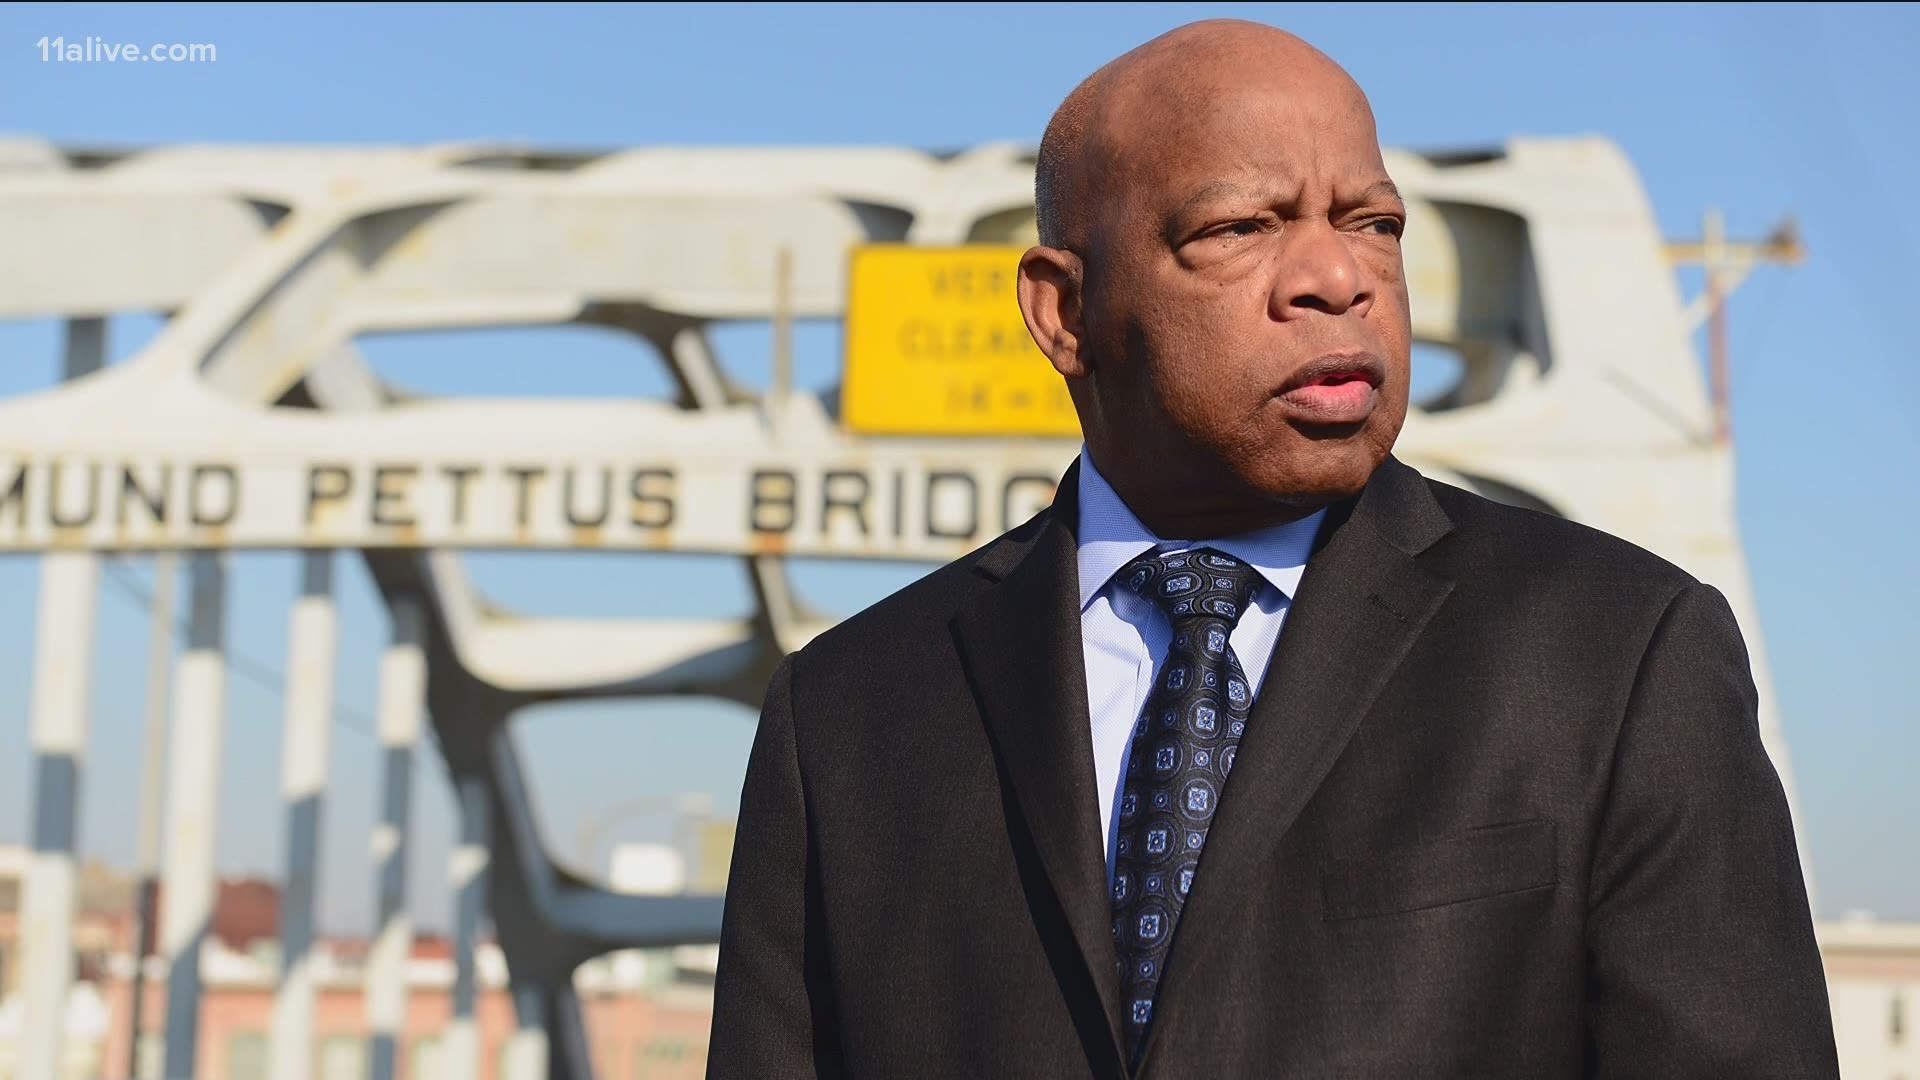 From Bloody Sunday to his decades as a U.S. House representative, voting rights were one of the constitutional principles John Lewis continued to fight for.